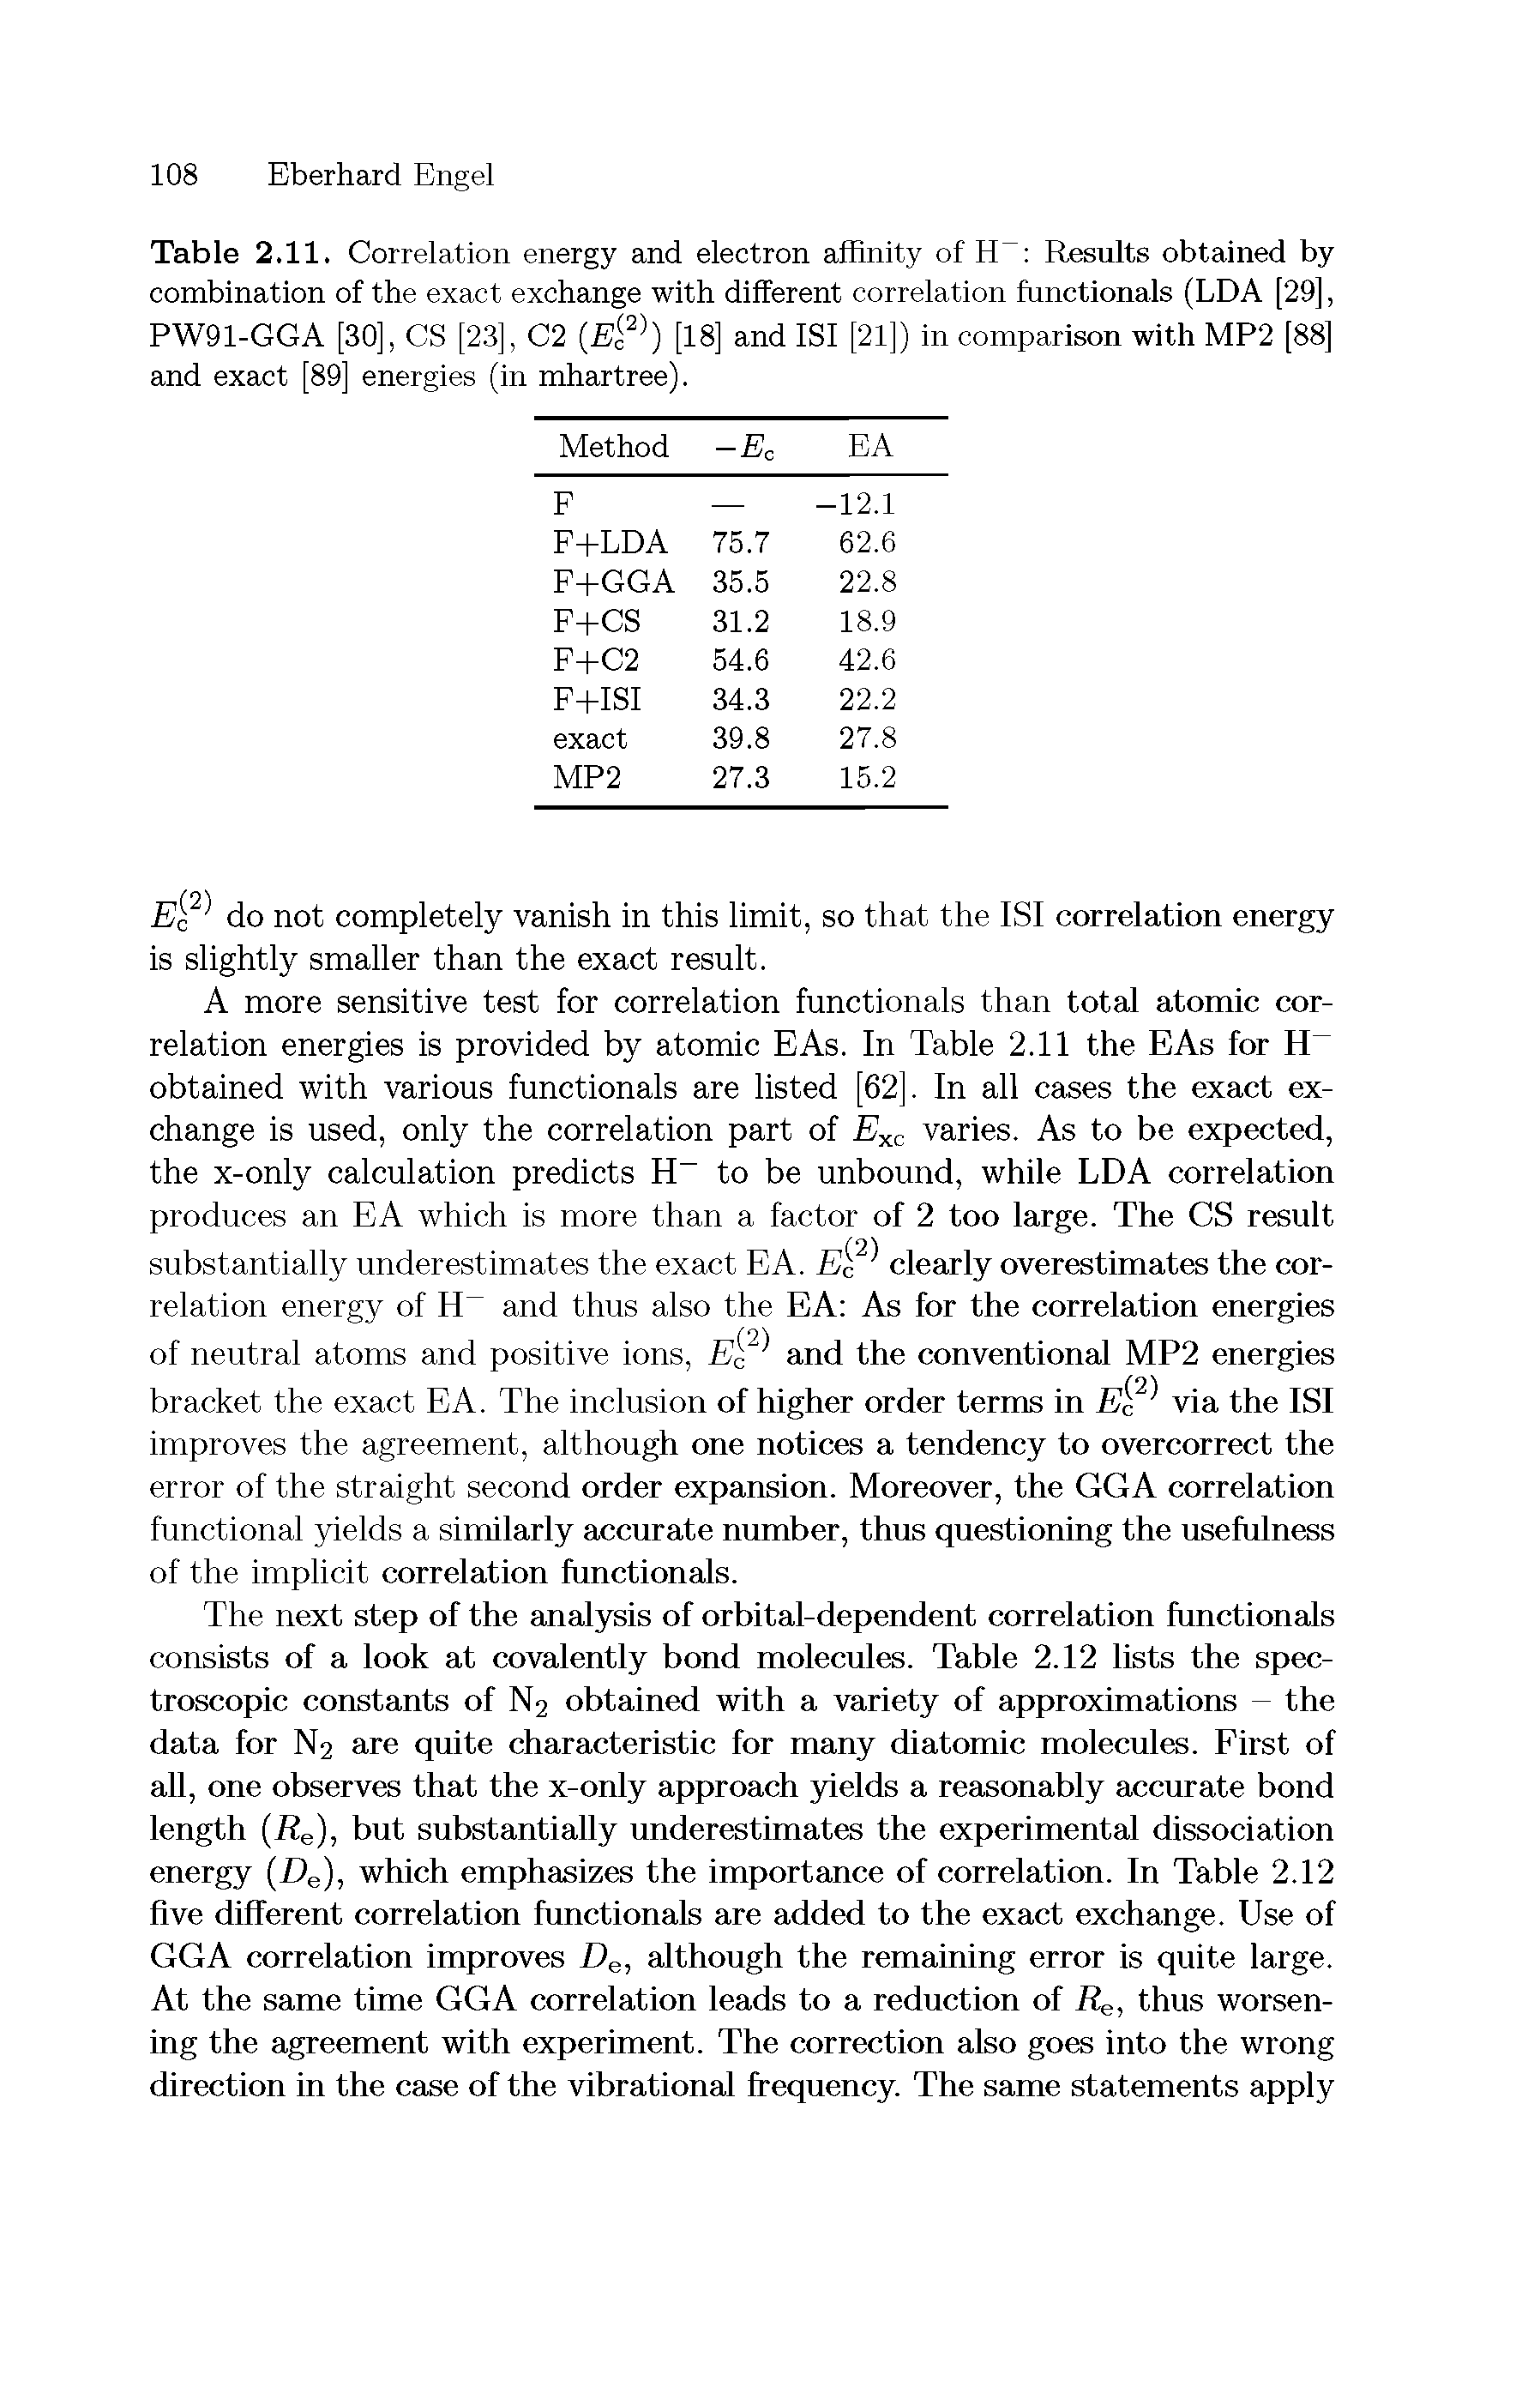 Table 2.11. Correlation energy and electron affinity of H Results obtained by combination of the exact exchange with different correlation functionals (LDA [29], PW91-GGA [30], CS [23], C2 [18] and ISI [21]) in comparison with MP2 [88]...